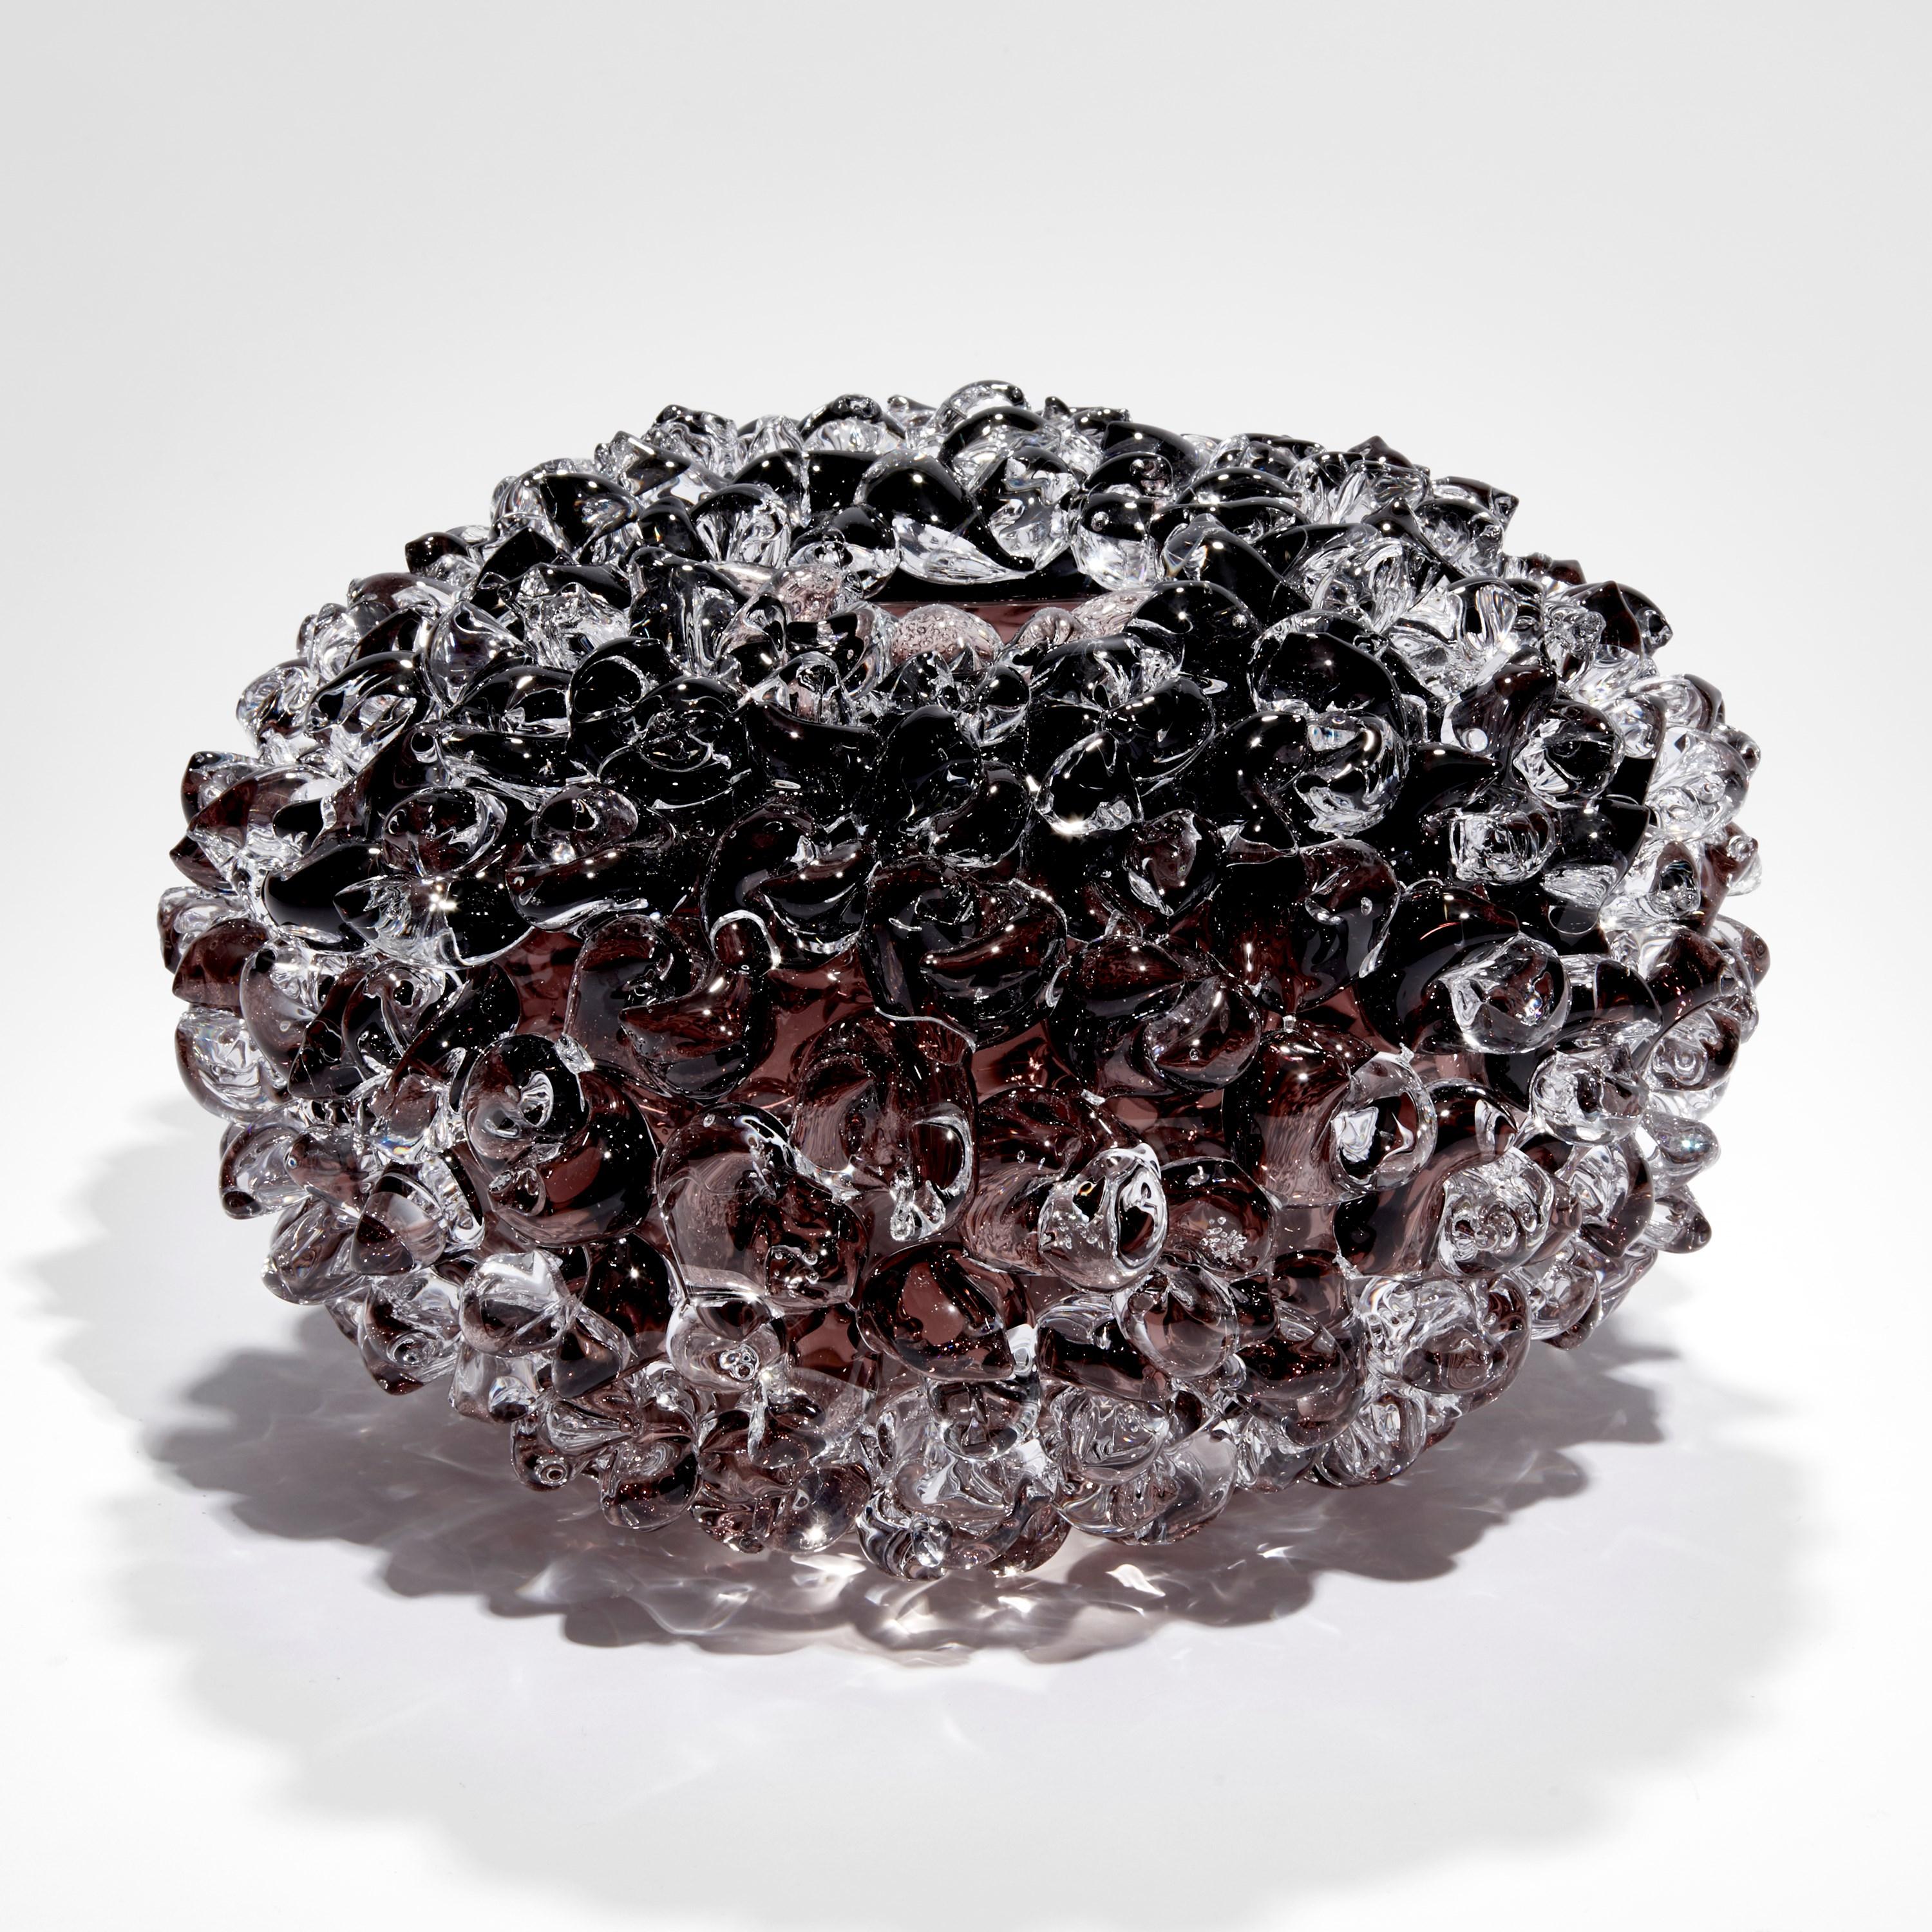 'Ostreum in Rauch Topaz' is a unique handblown and sculpted decorative glass centrepiece by the British artist, Katherine Huskie.

Huskie has been working with glass for over 10 years. Having started experimenting with glass at college she